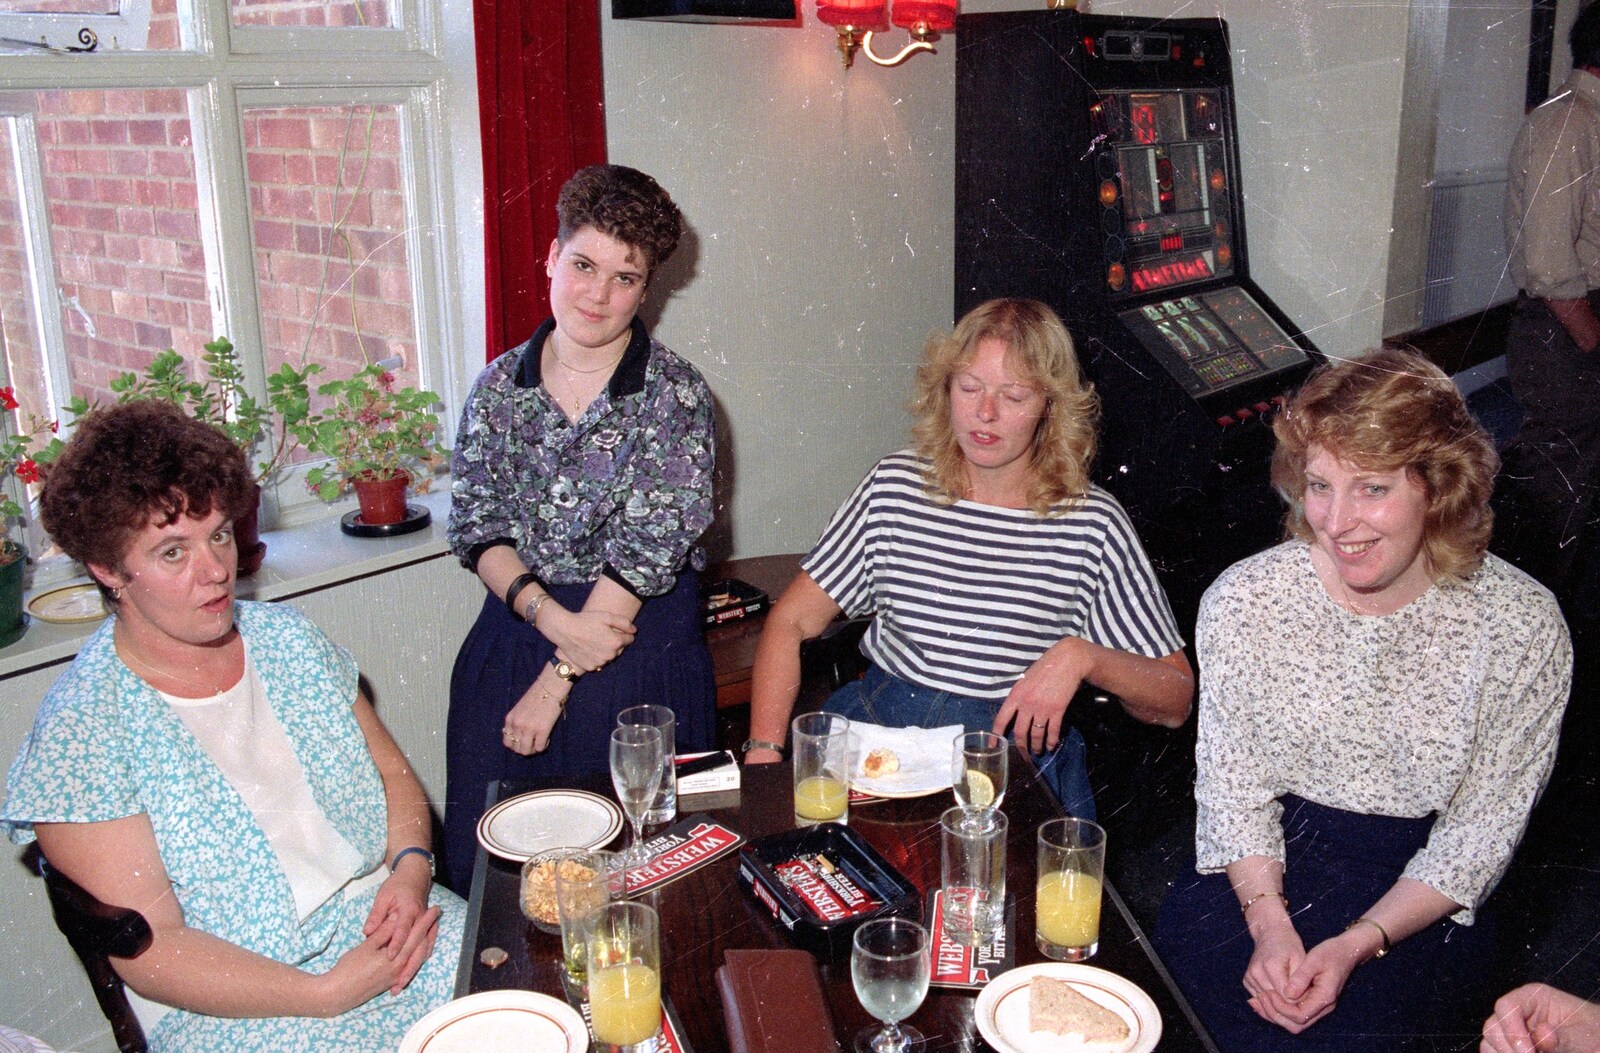 Crispy, Kelly, Big Sue and Jackie in the Railway from Kite Flying, and an Introduction to BPCC Printec, Diss, Norfolk - 3rd August 1989